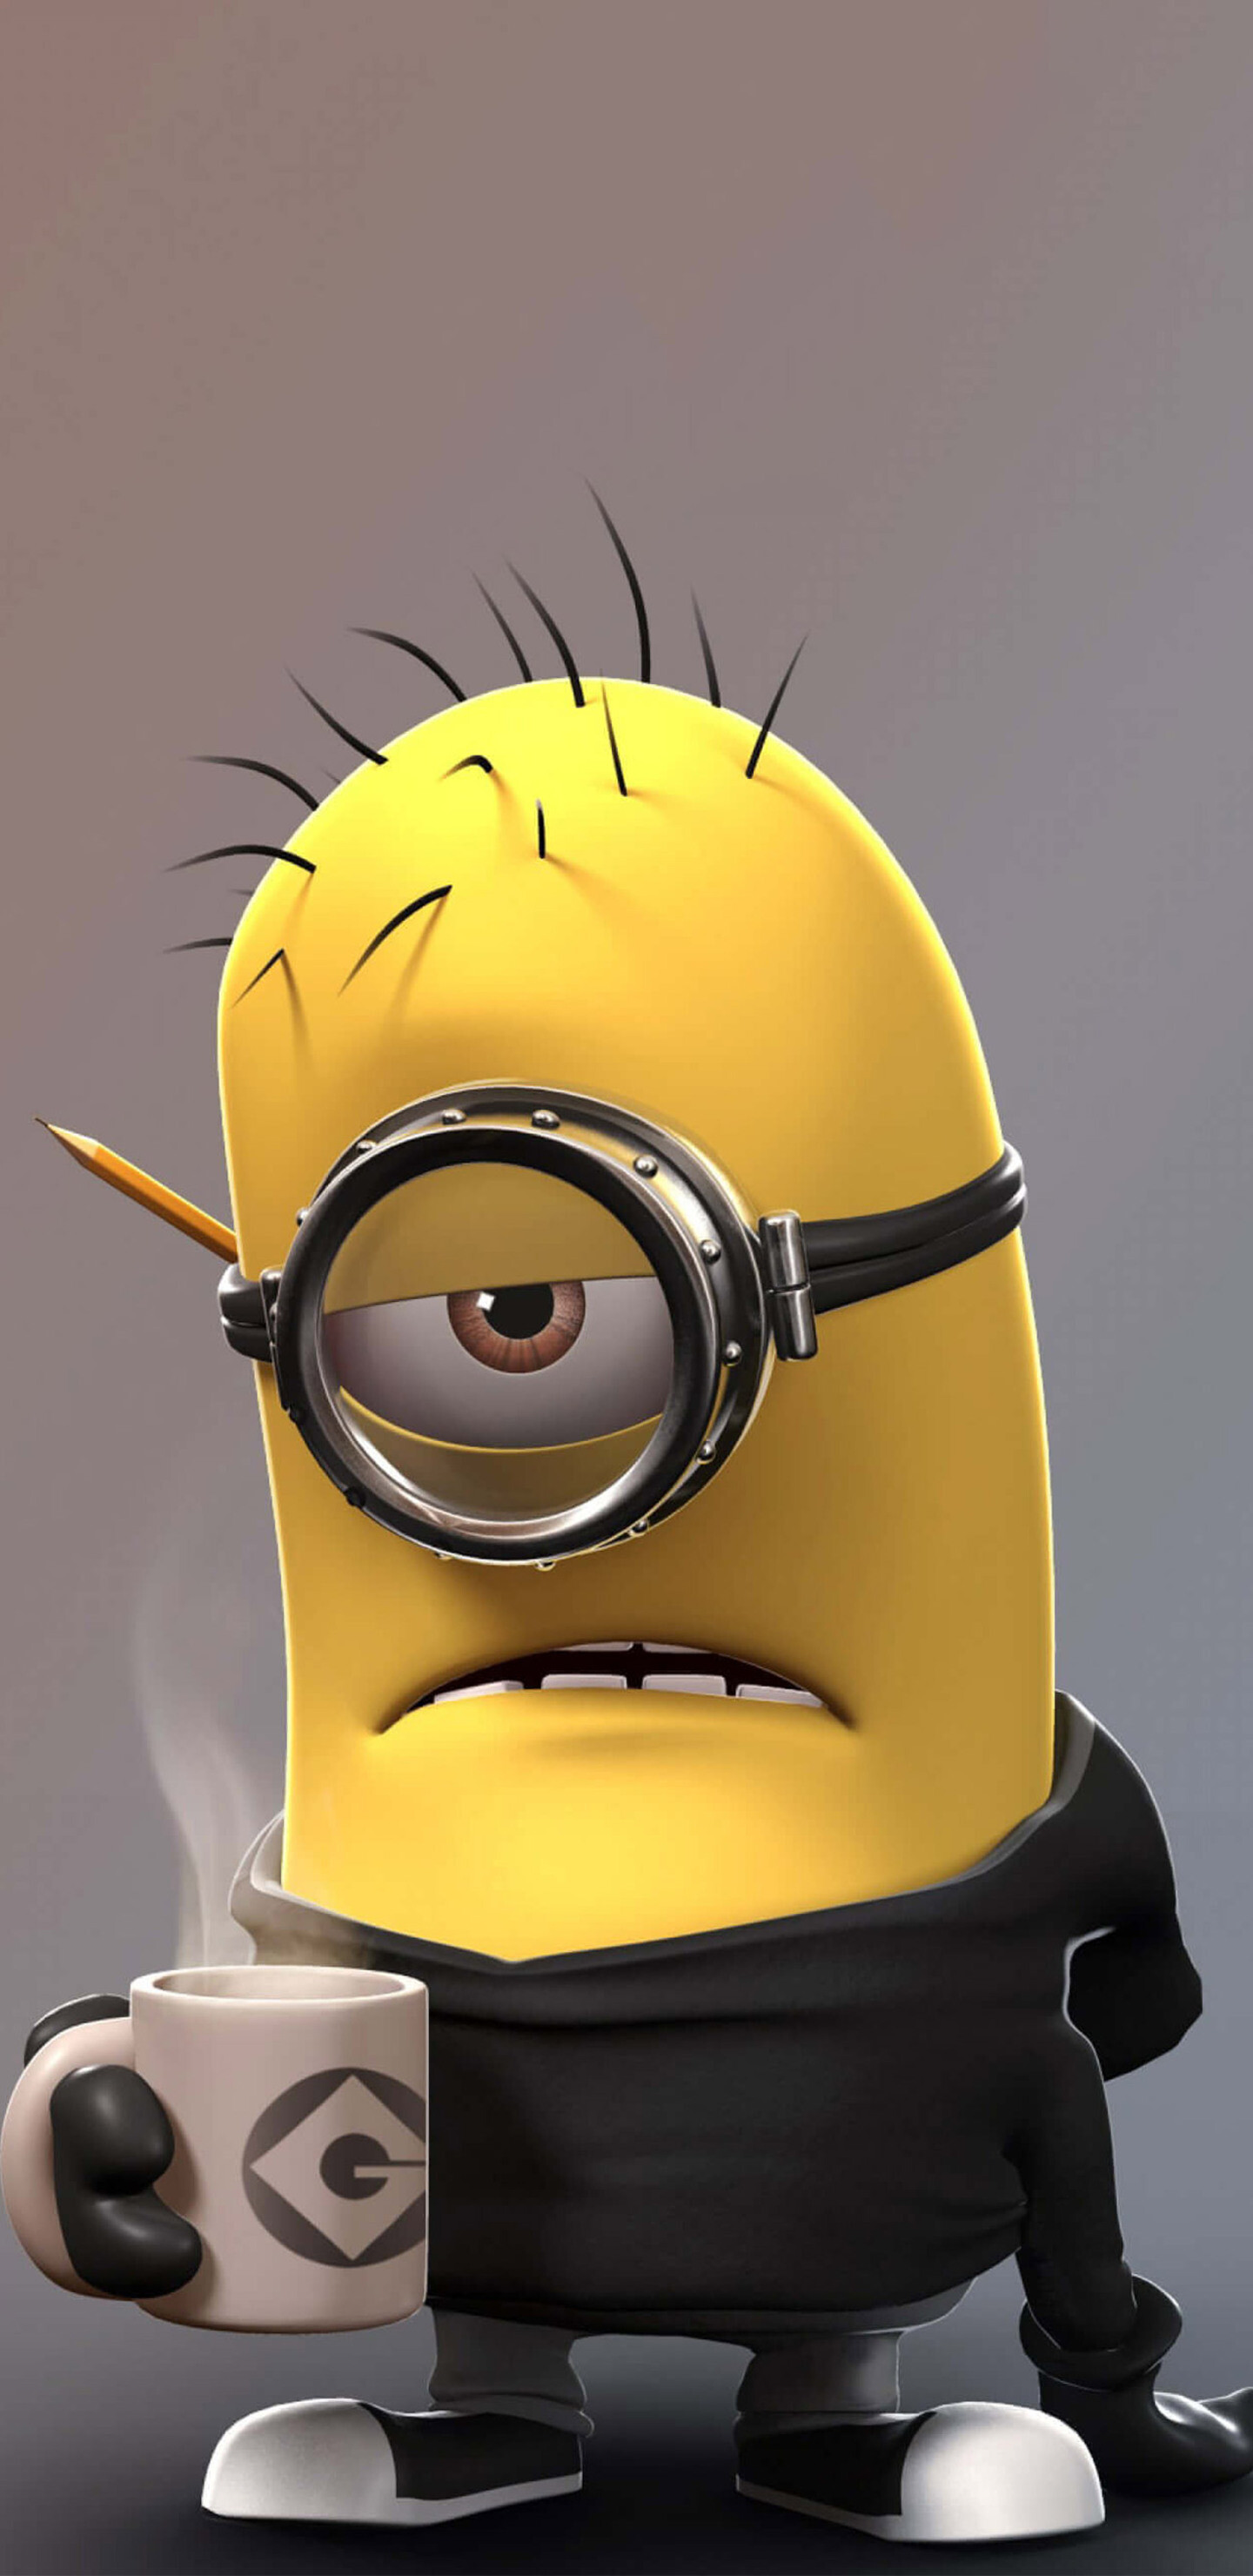 Despicable Me: Minion, fiercely loyal to Gru and Dr. Nefario and extremely eager to please. 1440x2960 HD Background.